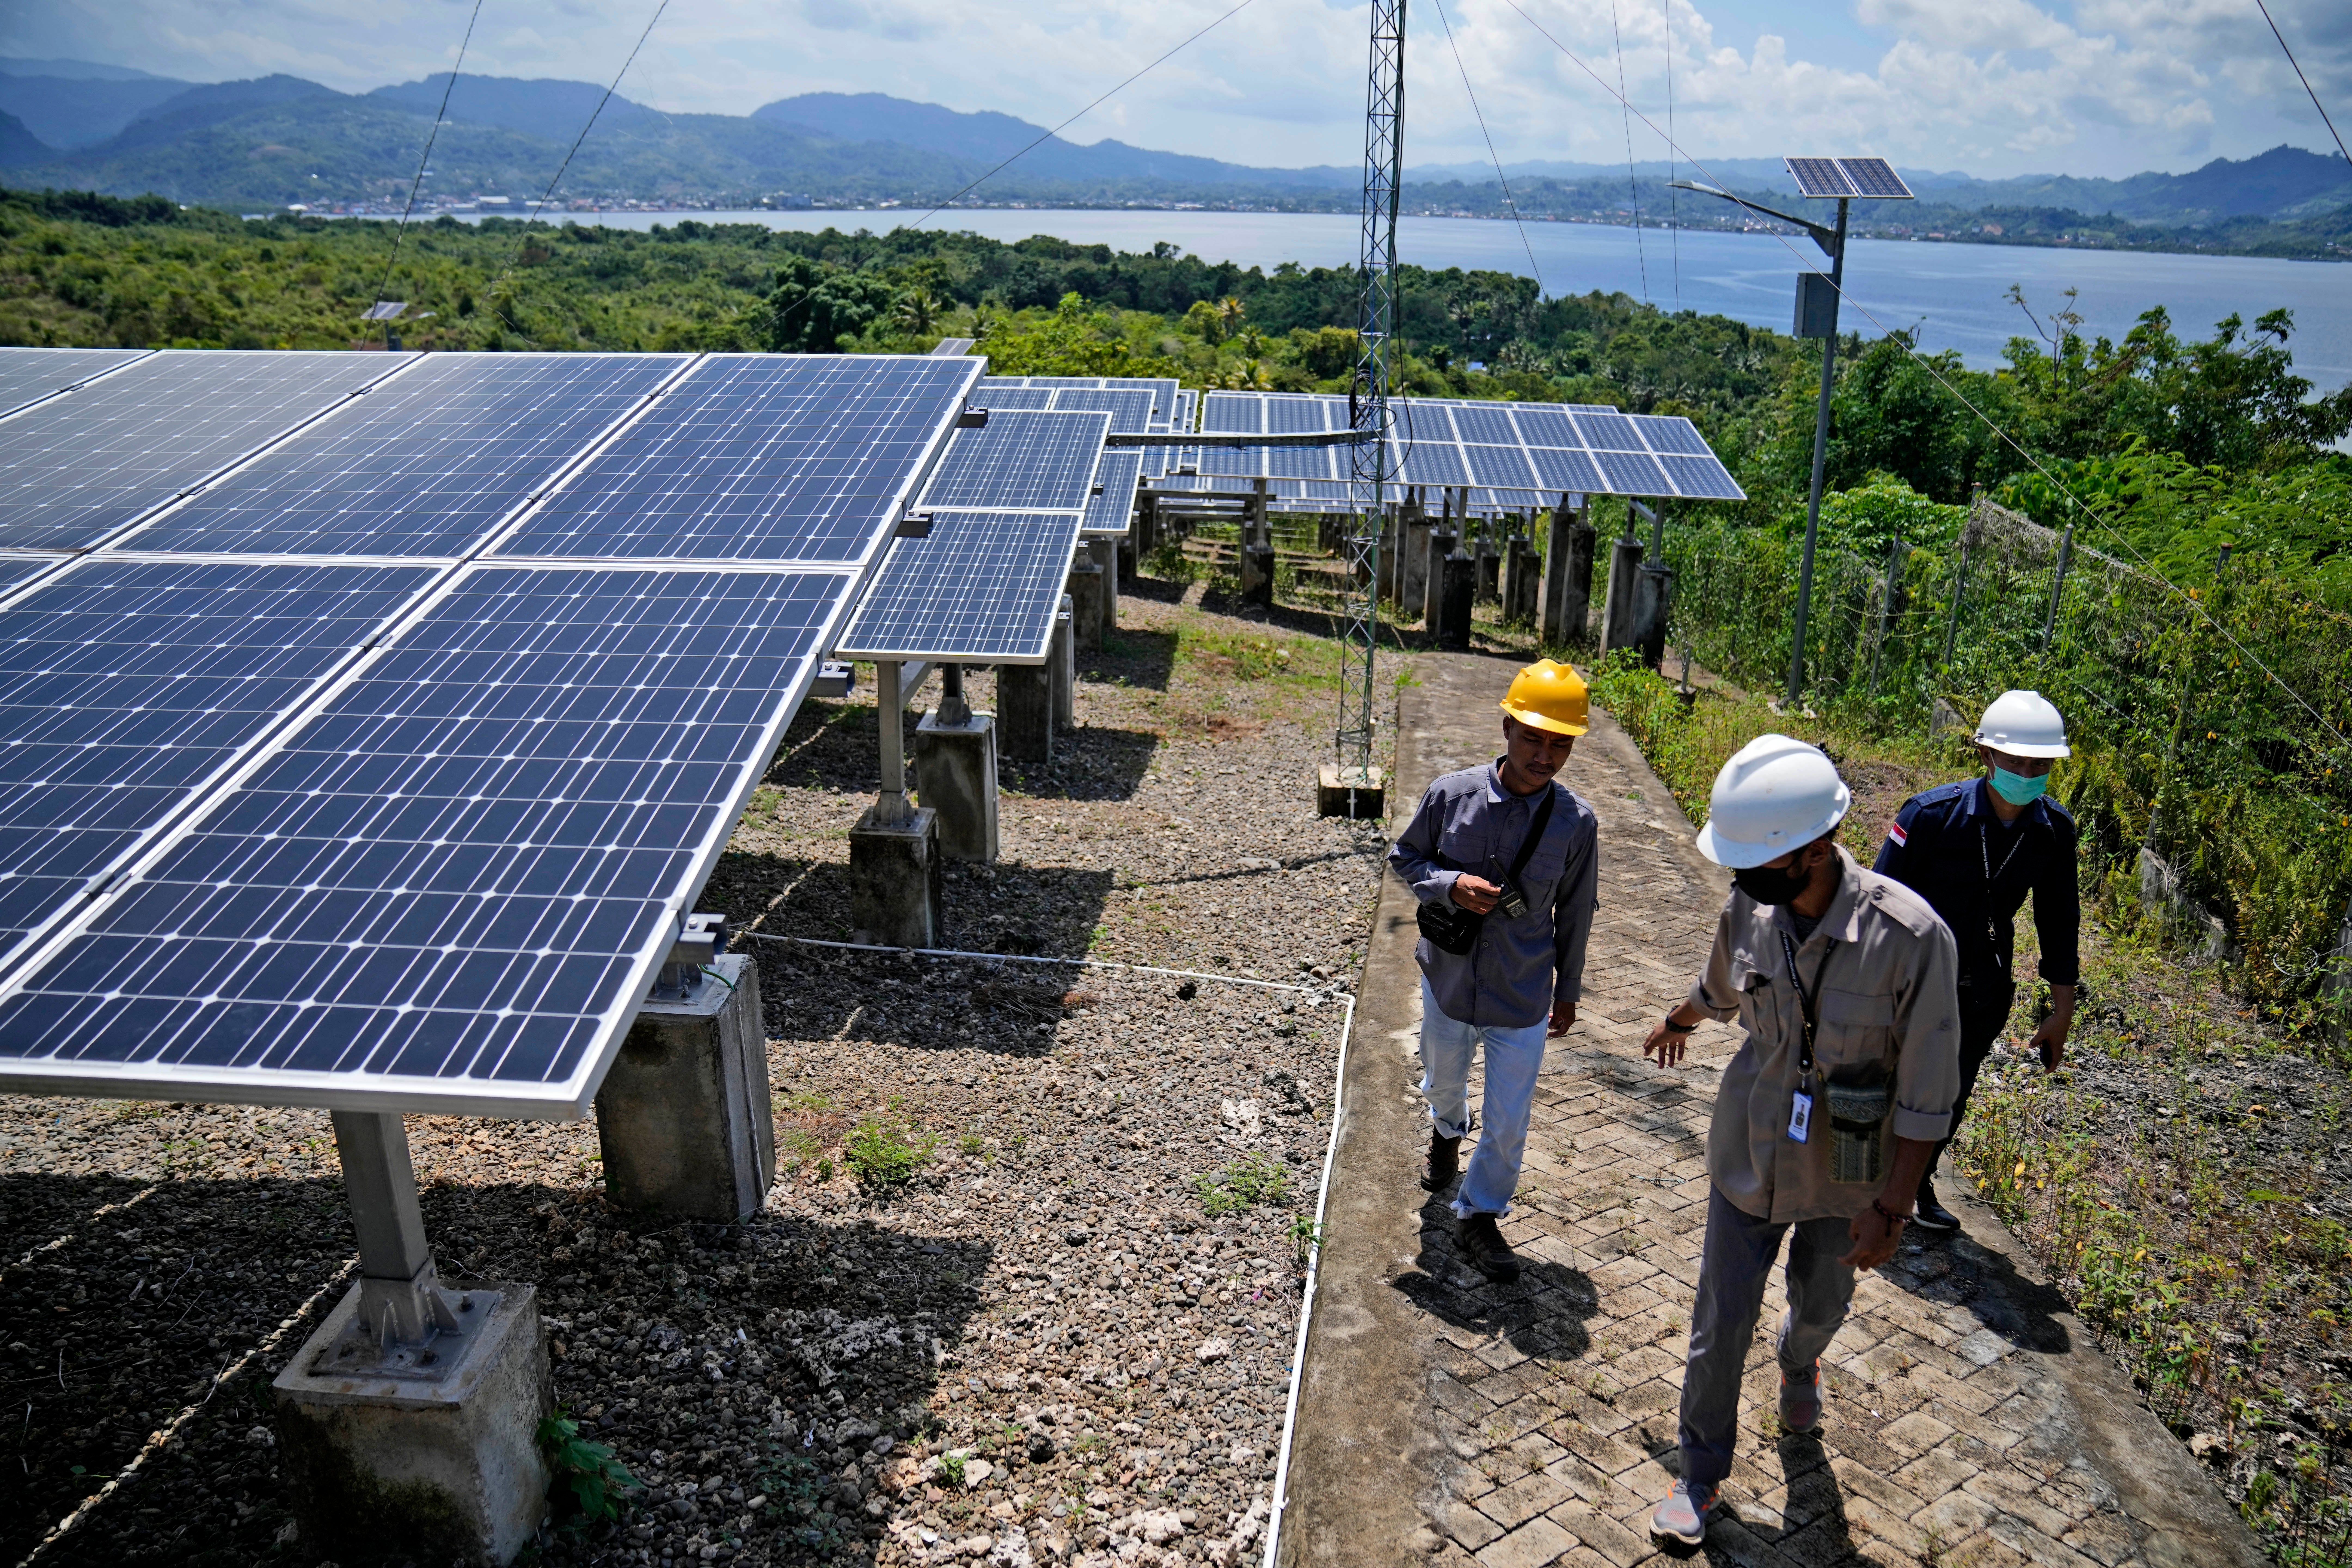 Indonesia Energy Transition